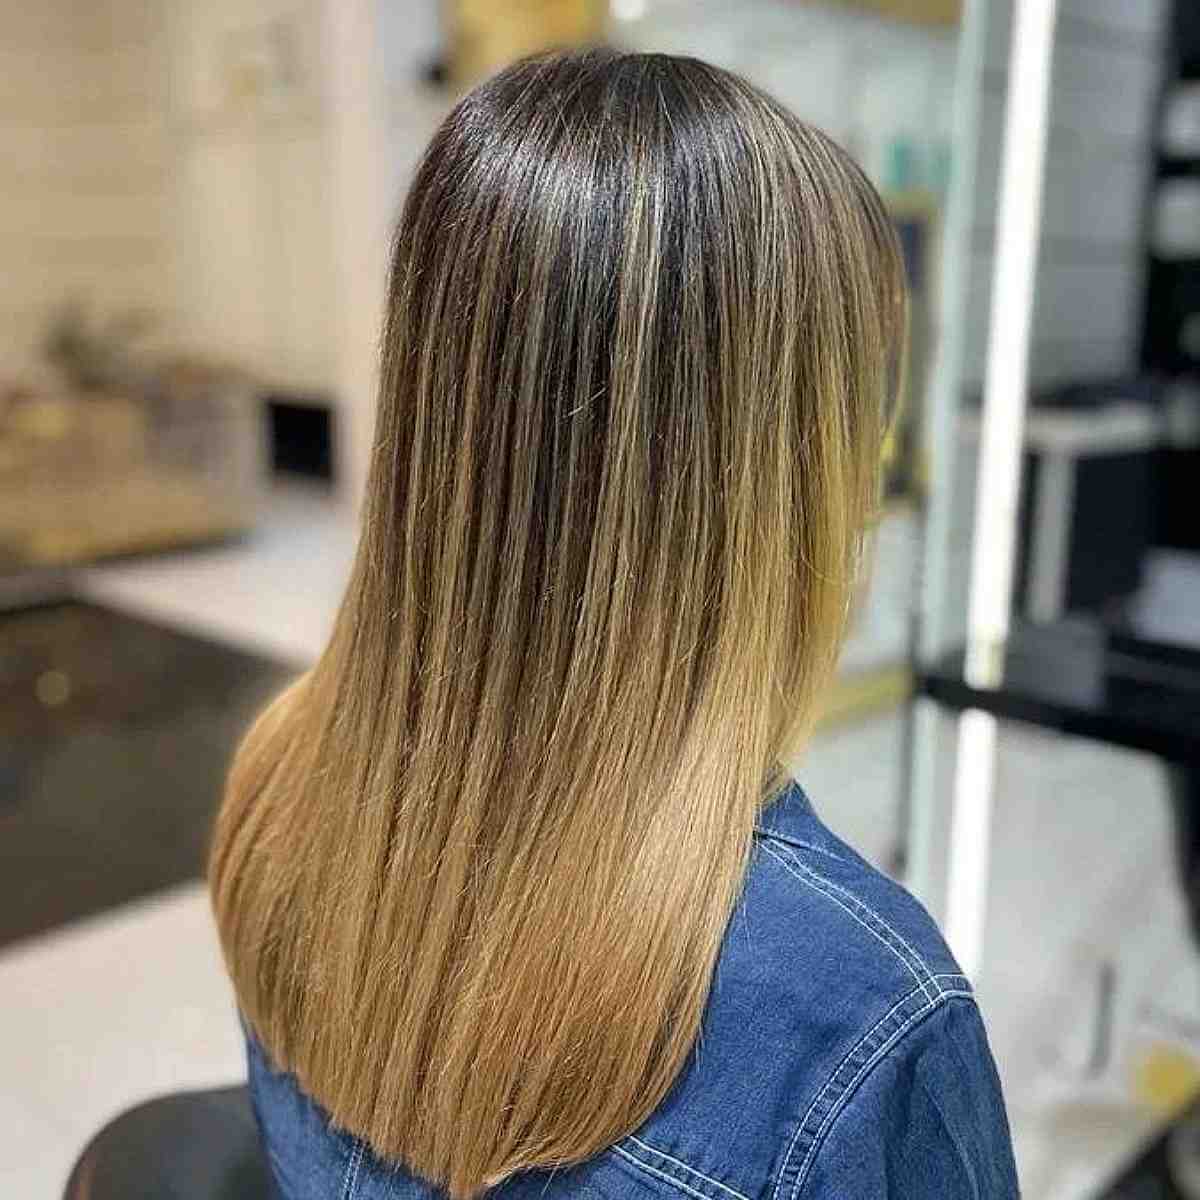 Brown hair with highlights and brighter tips